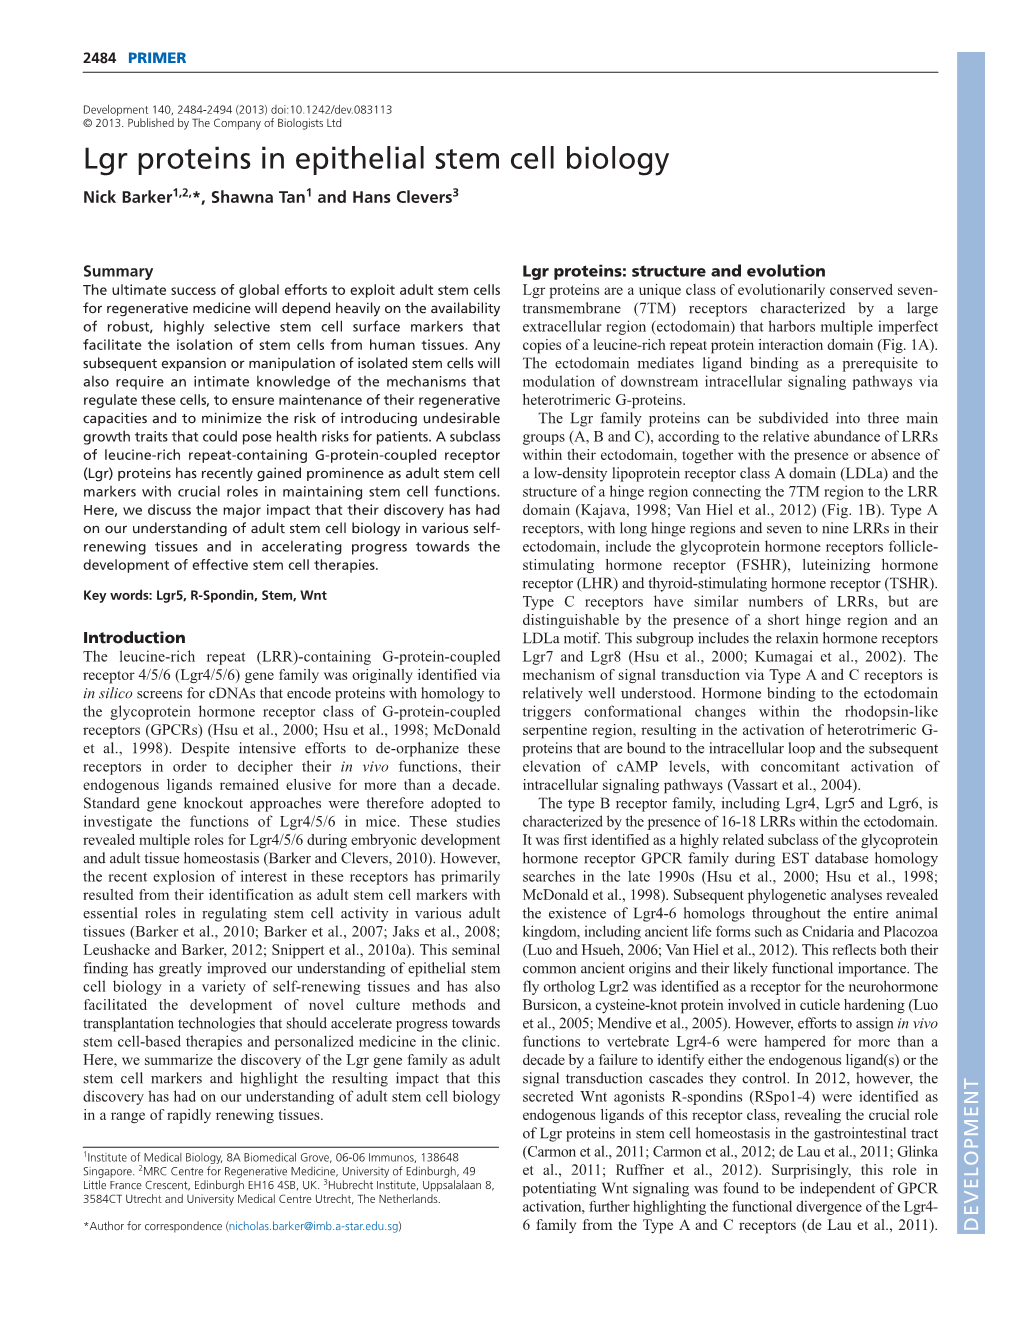 Lgr Proteins in Epithelial Stem Cell Biology Nick Barker1,2,*, Shawna Tan1 and Hans Clevers3